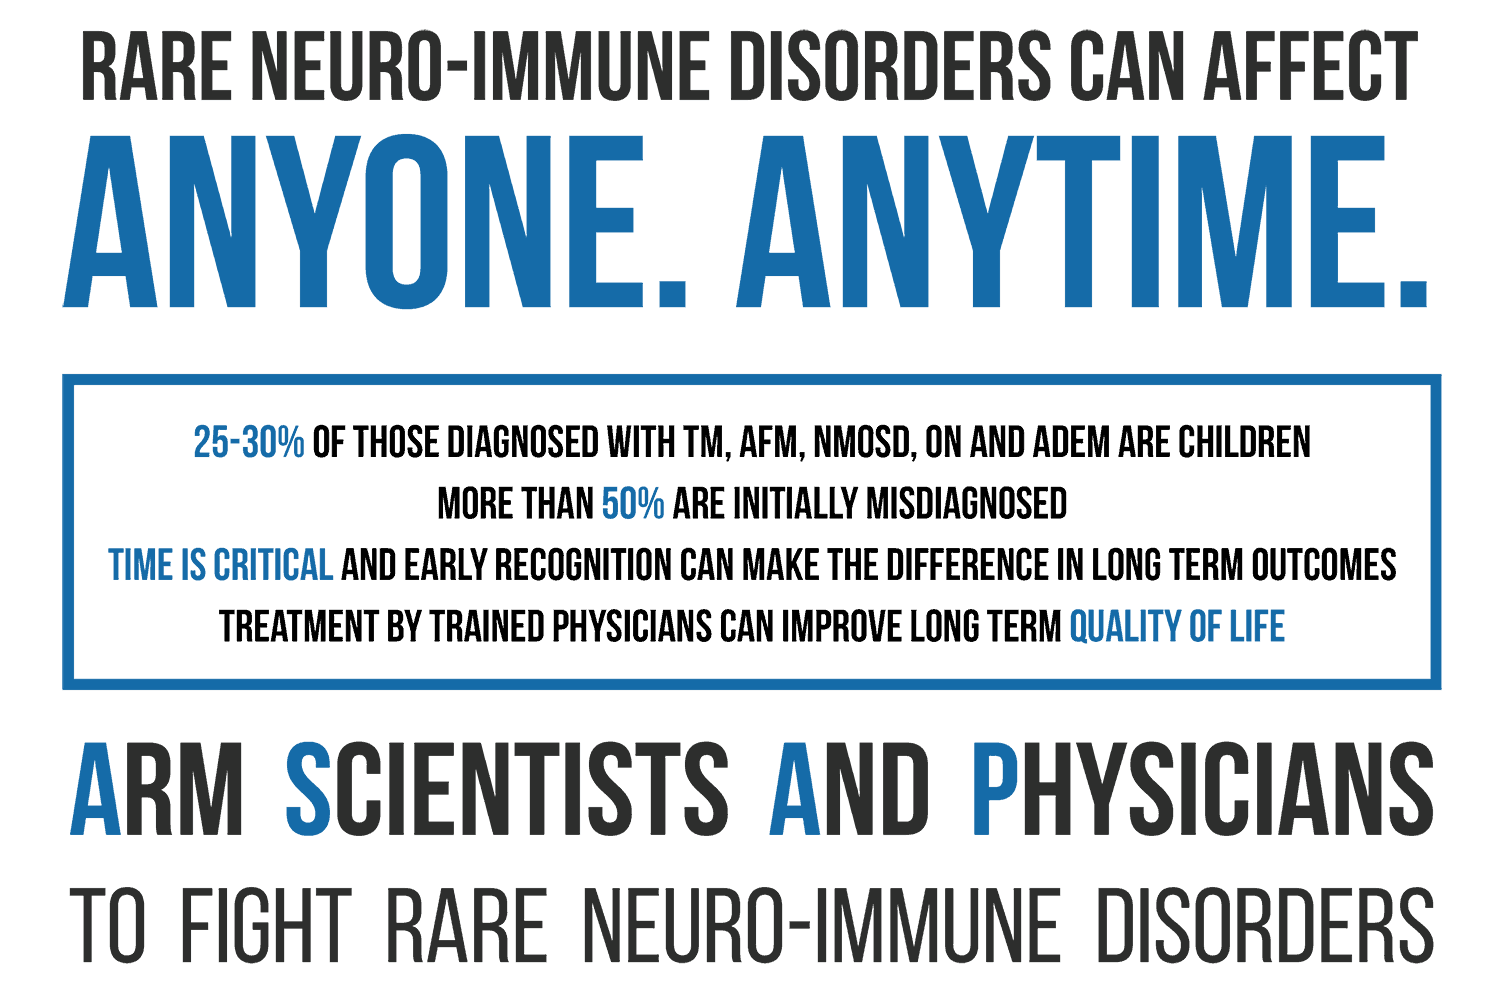 Rare Neuroimmune diseases can affect ANYONE. ANYTIME. 25-30% of those diagnosed are children. More than 50% are initially misdiagnosed. Time is critical and early recognition can make the difference in long term outcomes. Treatment by trained physicians can improve long term quality of life. Arm Physicians And Scientists to fight rare neuroimmune disorders.